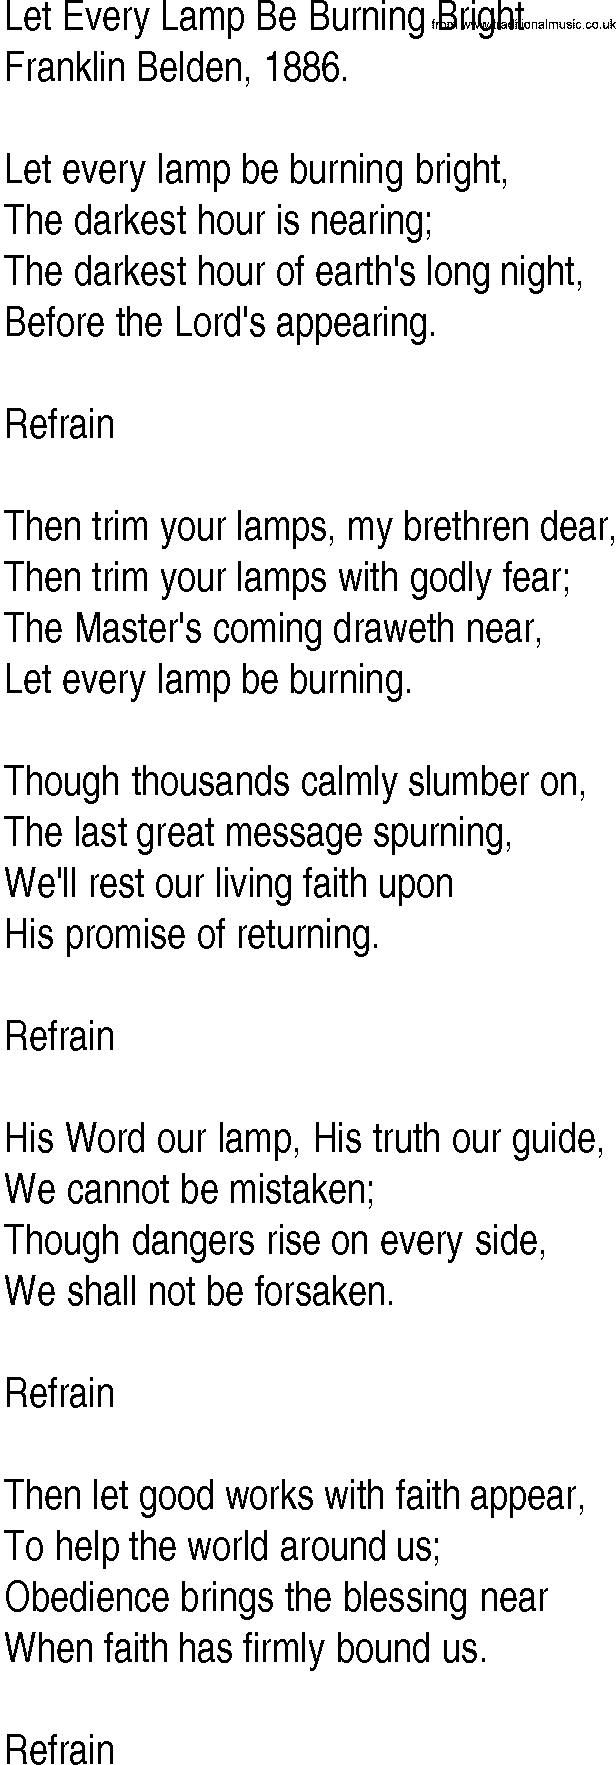 Hymn and Gospel Song: Let Every Lamp Be Burning Bright by Franklin Belden lyrics